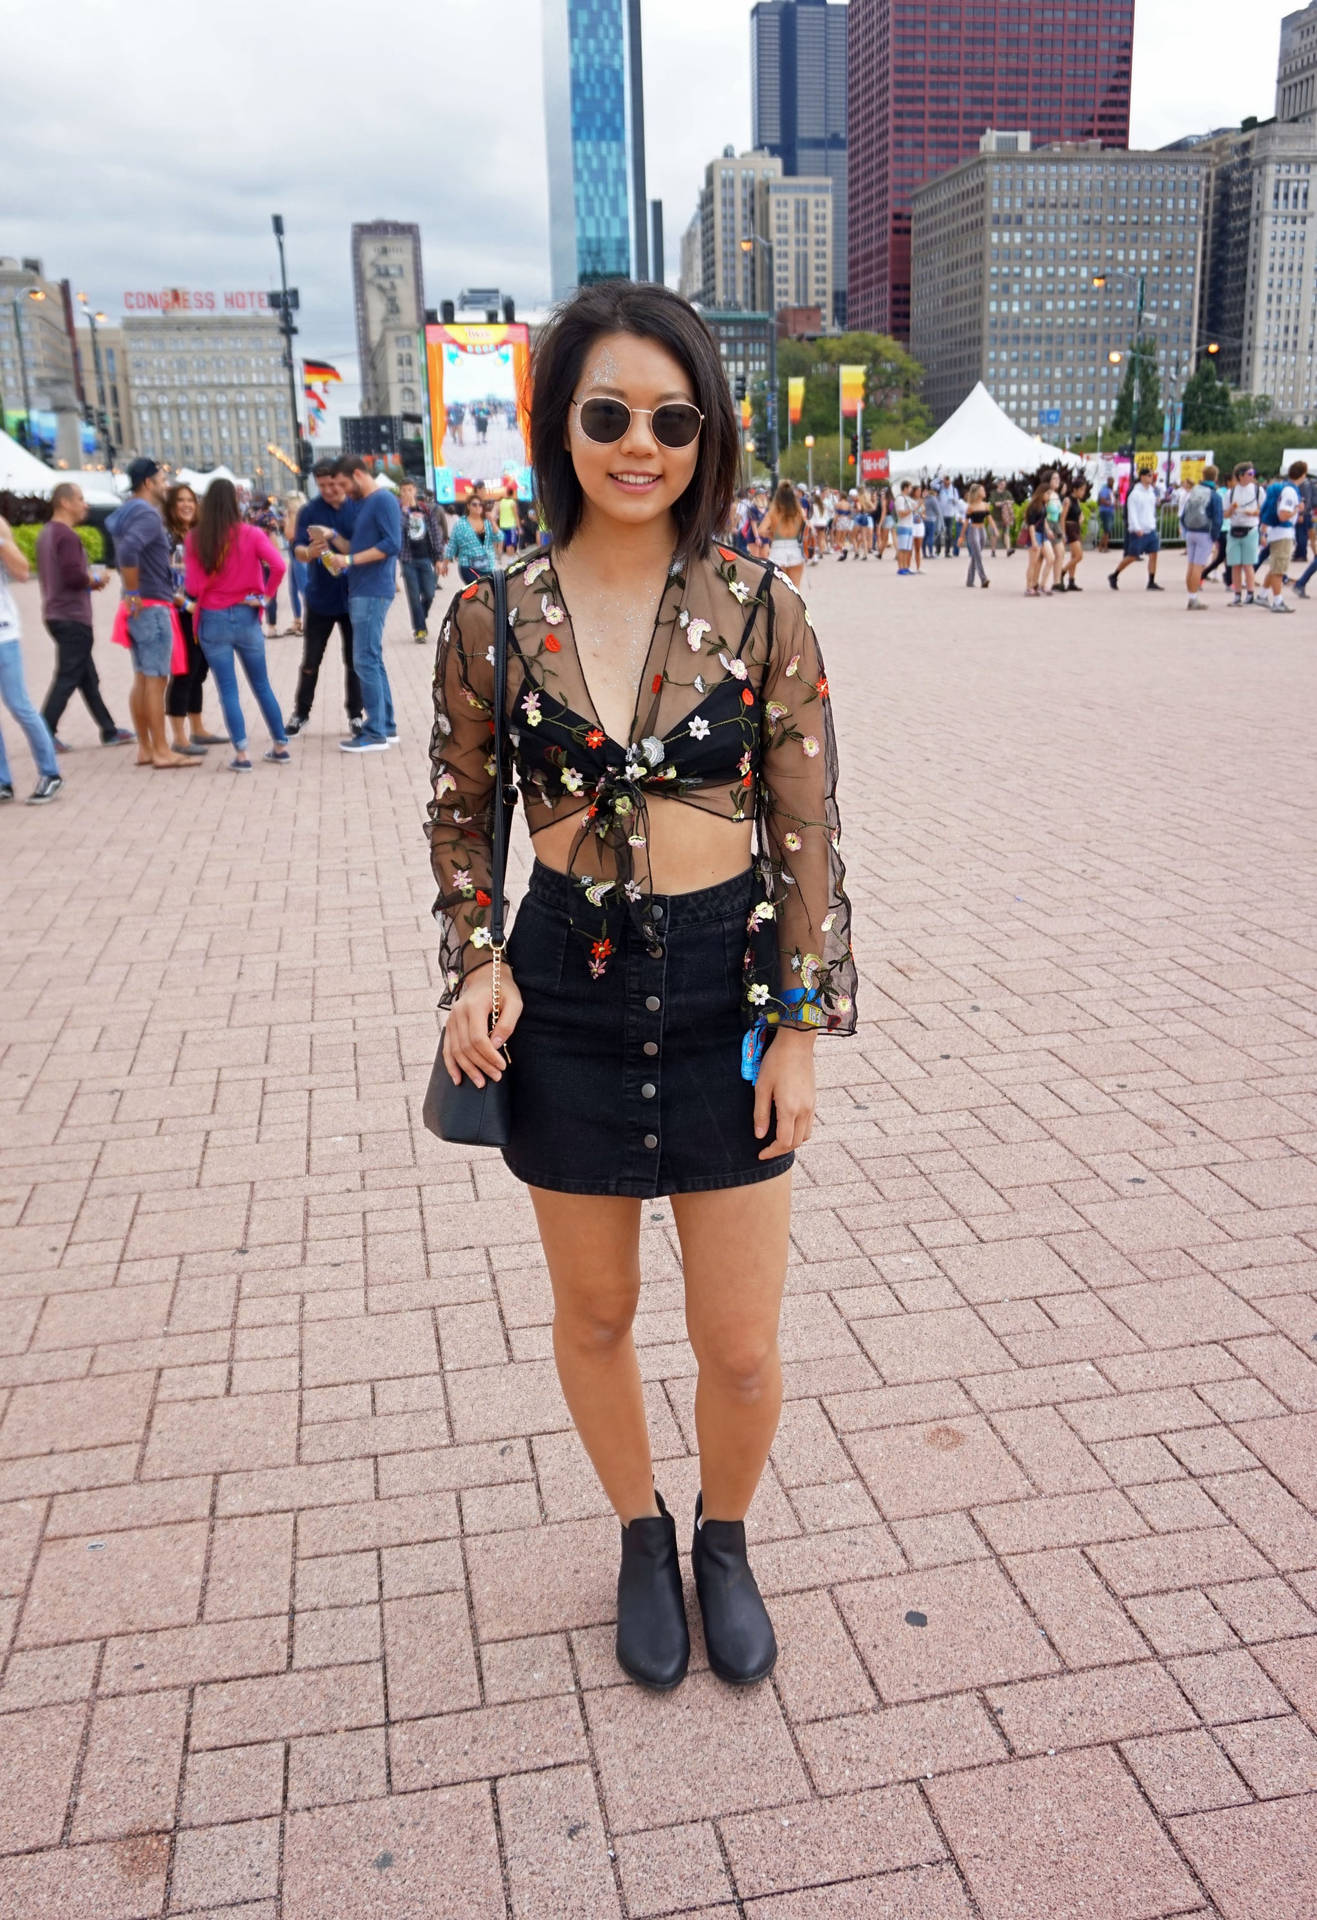 Get Ready For An Unforgettable Music Experience With The Perfect Outfit For Lollapalooza. Background